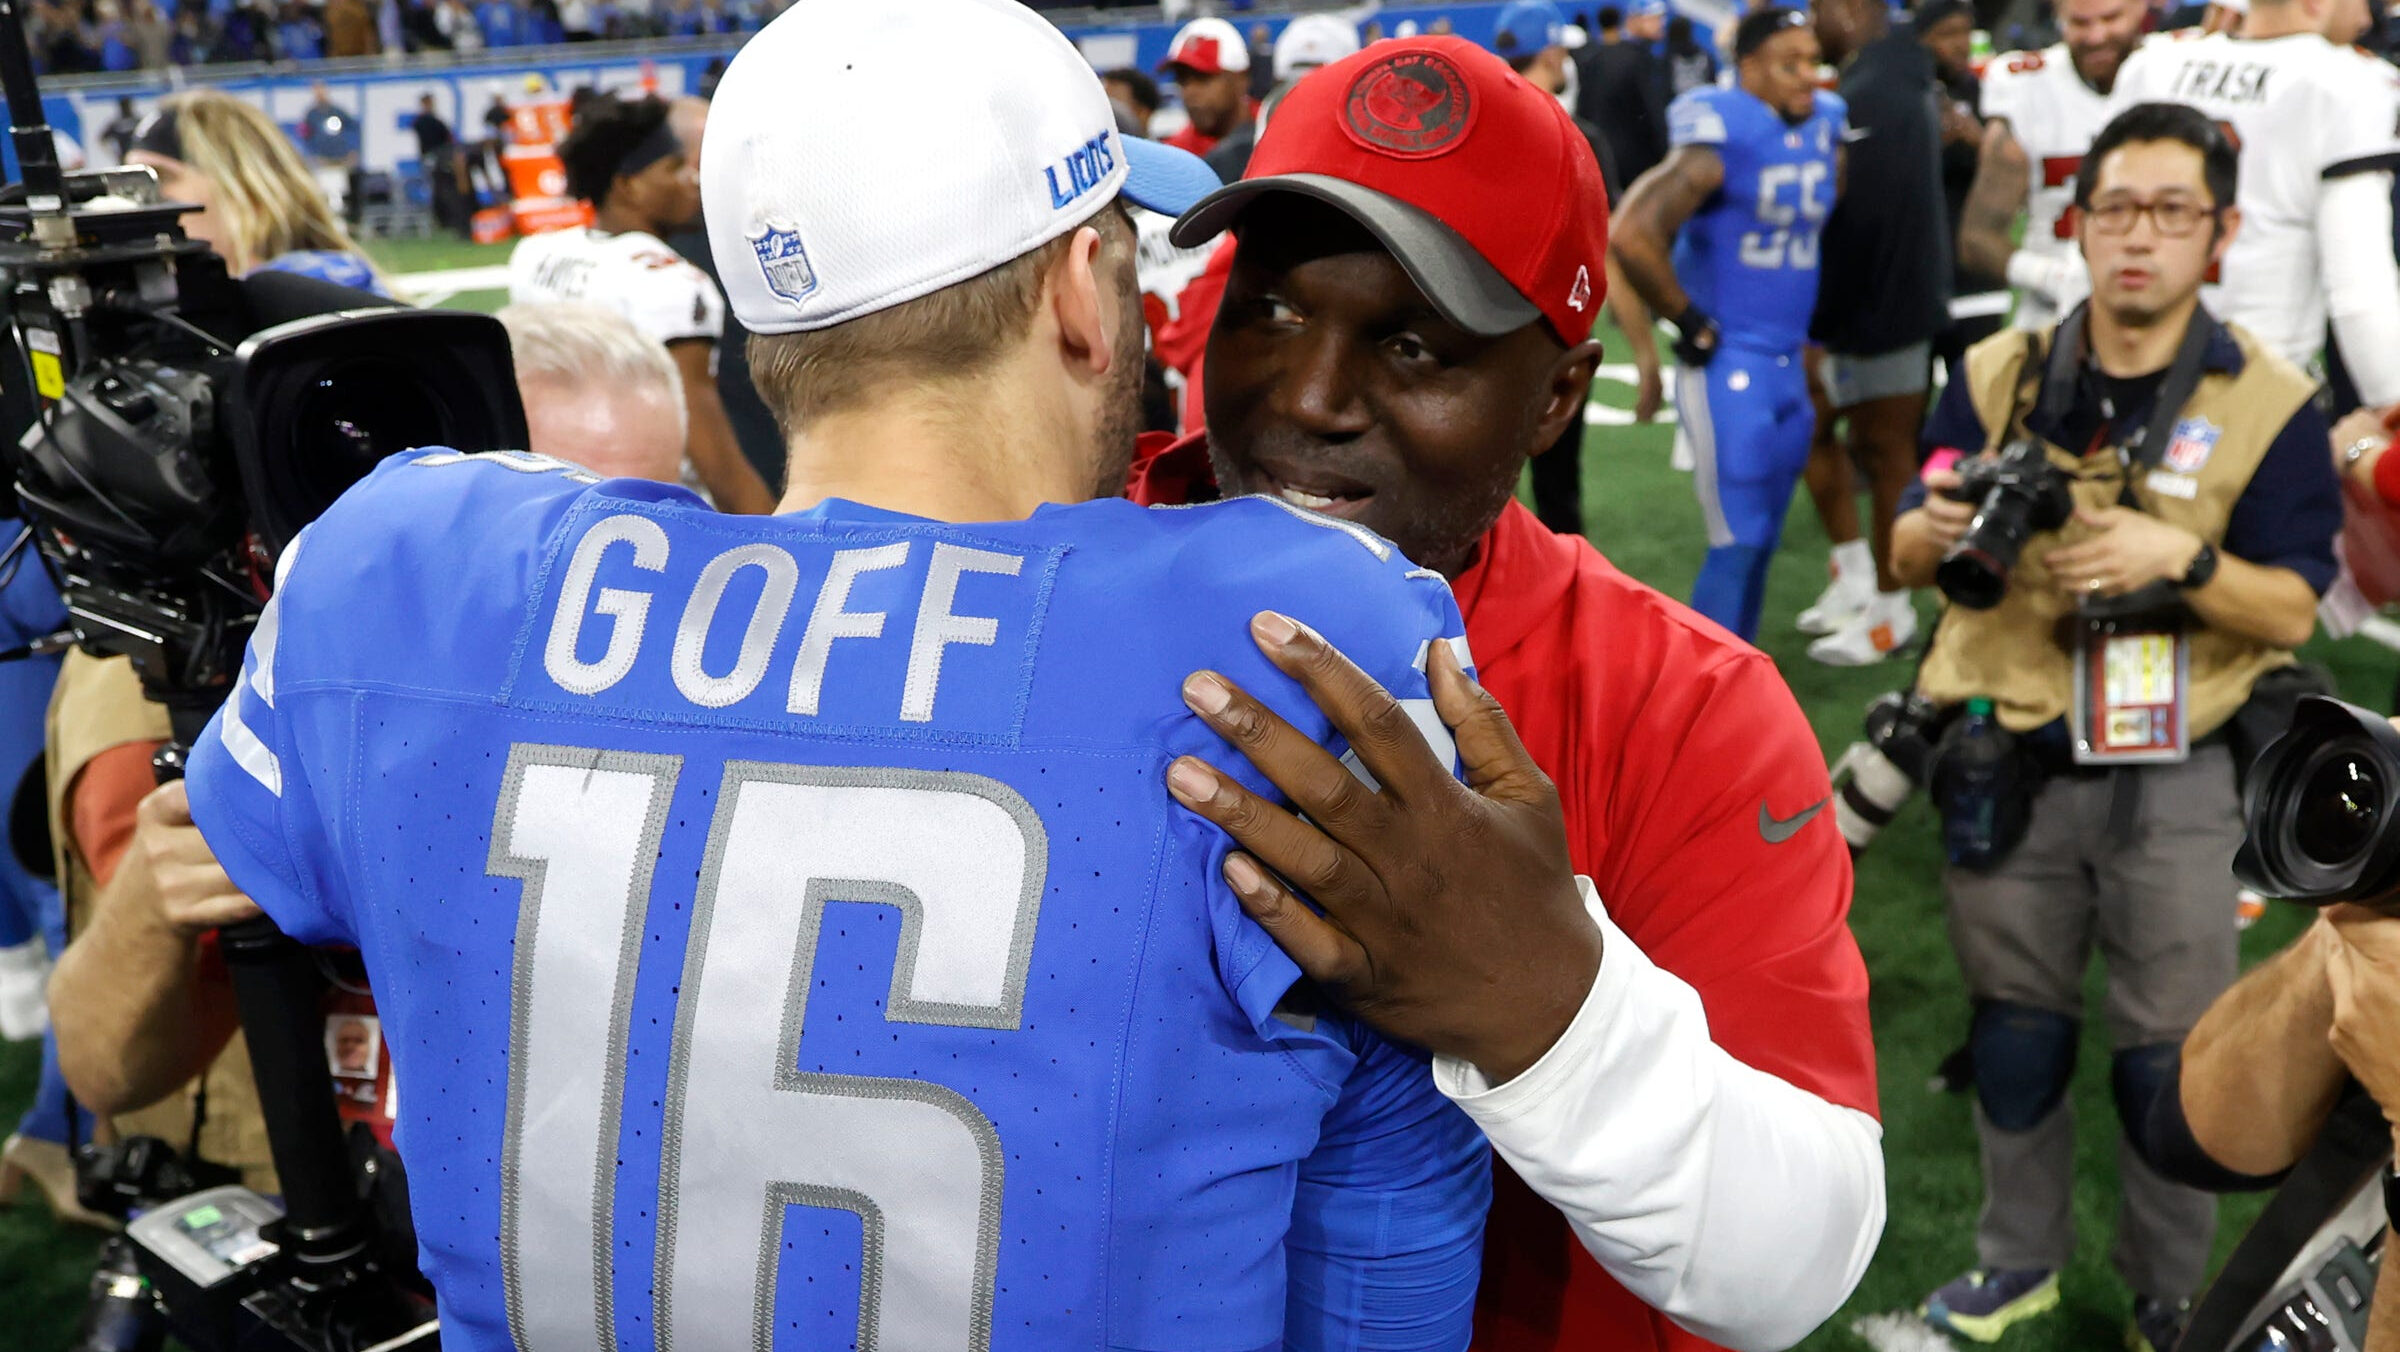 Todd Bowles hugs Jared Goff following divisional round game